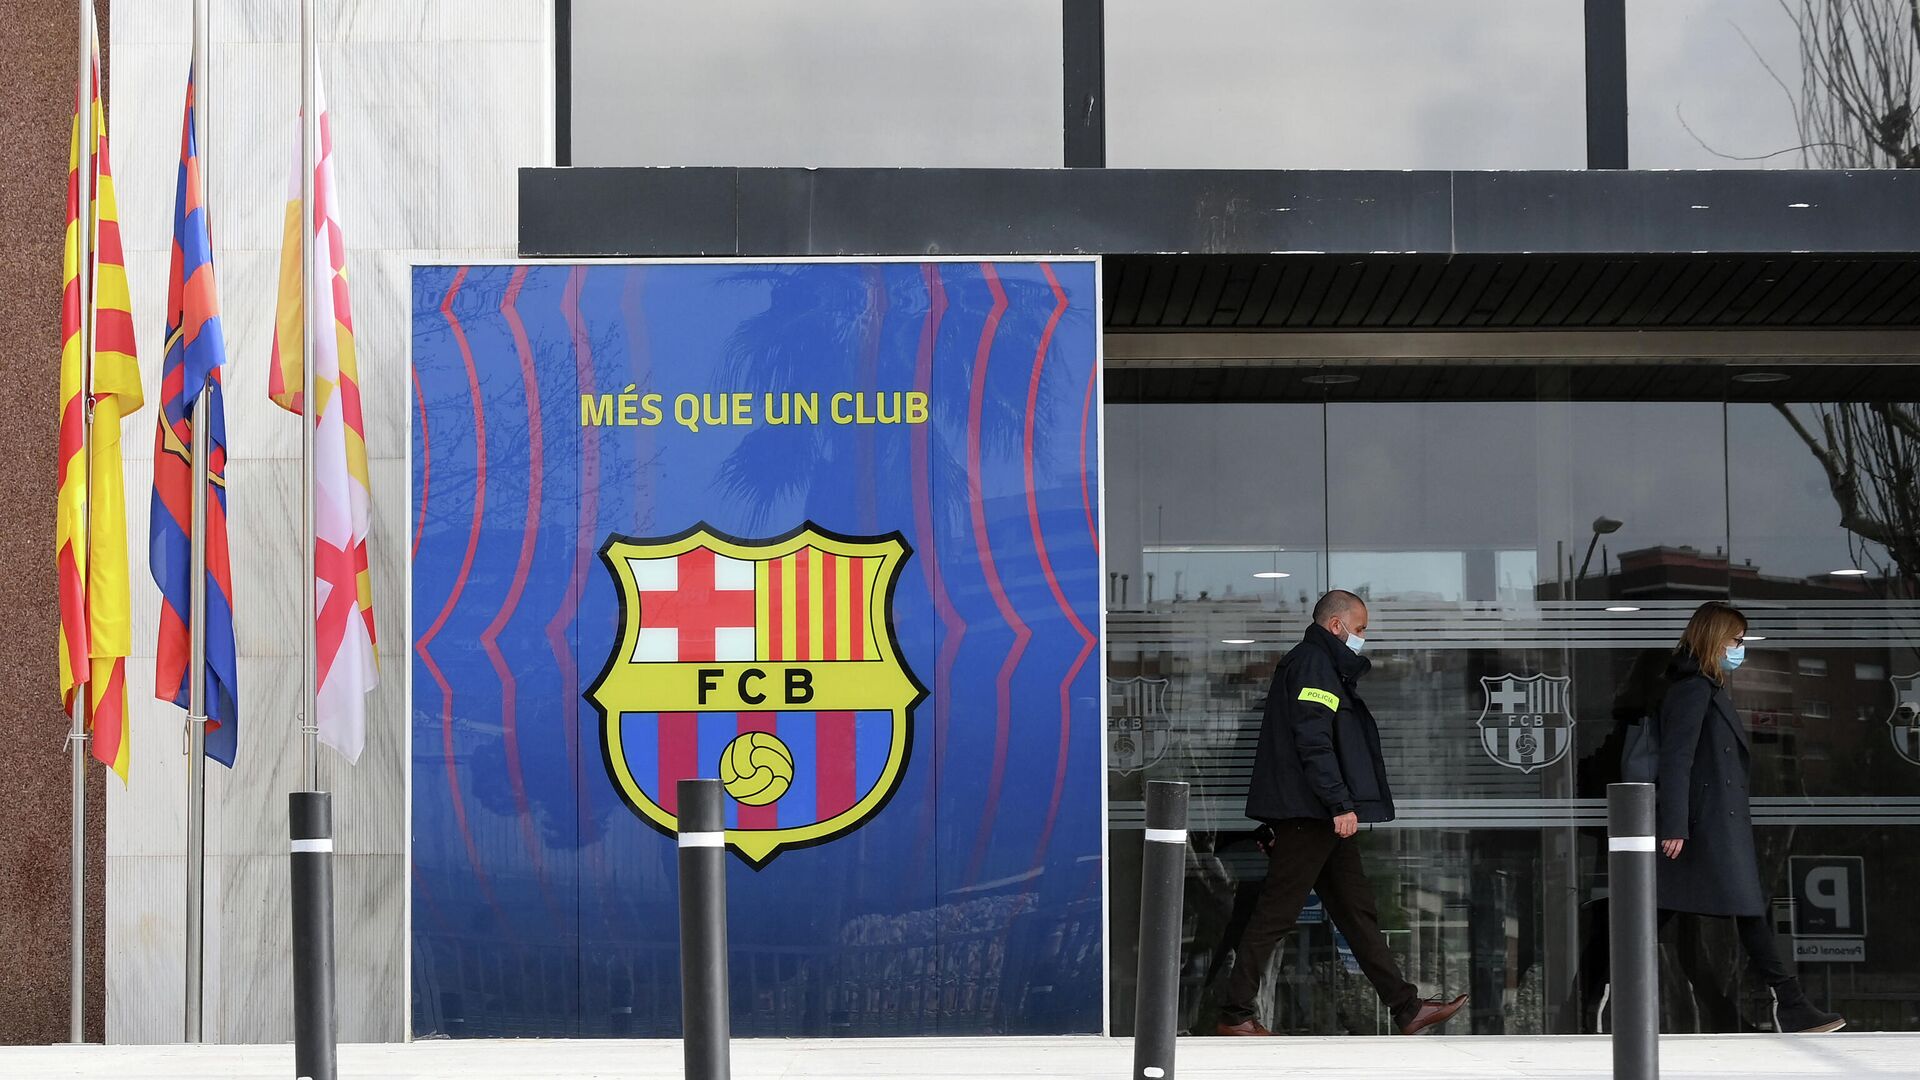 Deputy Chief of the Criminal Investigation Division of Catalan regional police forces Mossos d'Esquadra, Marta Fernandez (R) leaves the offices of Barcelona Football Club on March 01, 2021 in Barcelona during a police operation inside the building. -  (Photo by LLUIS GENE / AFP) - РИА Новости, 1920, 01.03.2021